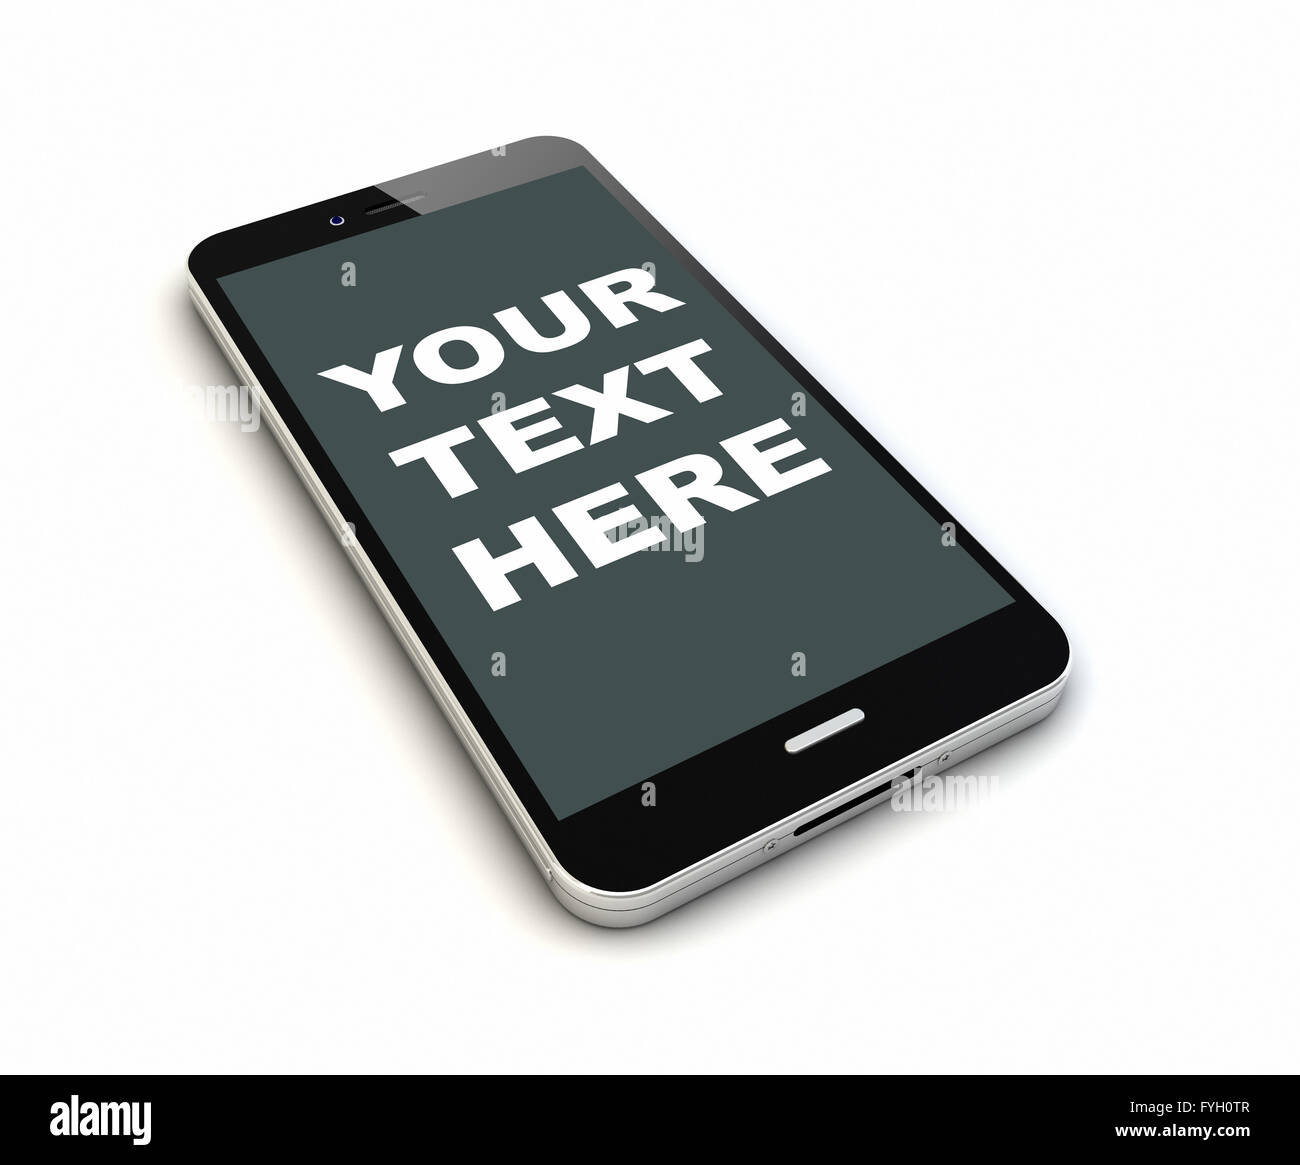 render of an original smartphone with blank screen. Screen graphics are made up. Stock Photo